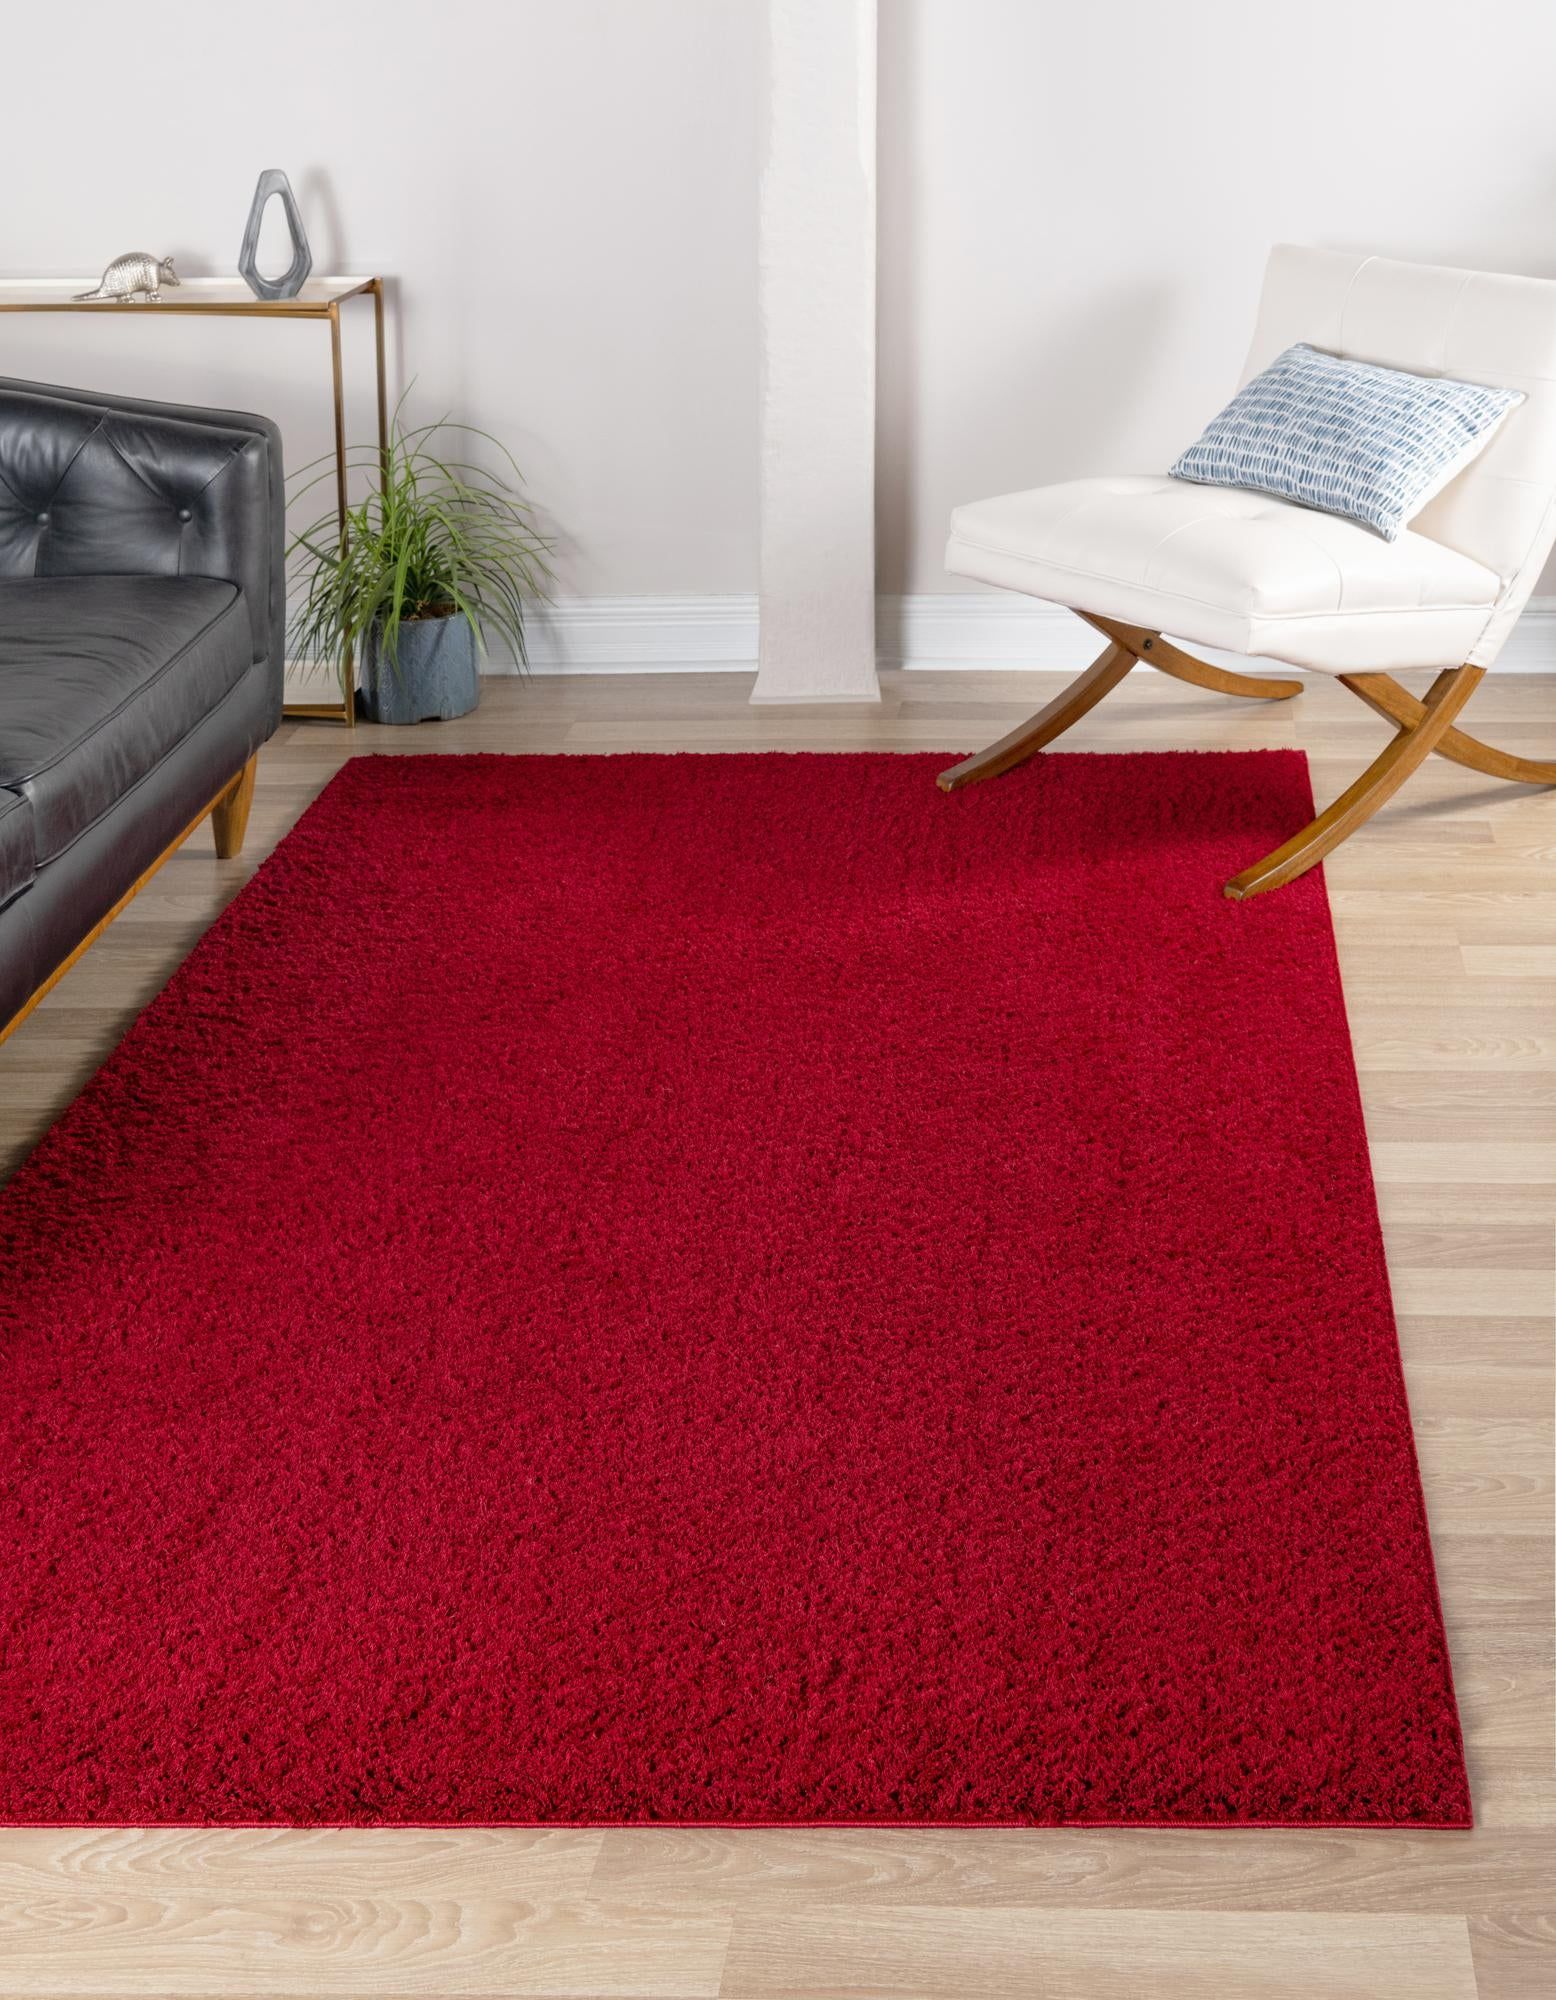 Red 155cm X 245cm Studio Solid Shag Rug | Irugs Ch With Red Solid Shag Rugs (View 8 of 15)